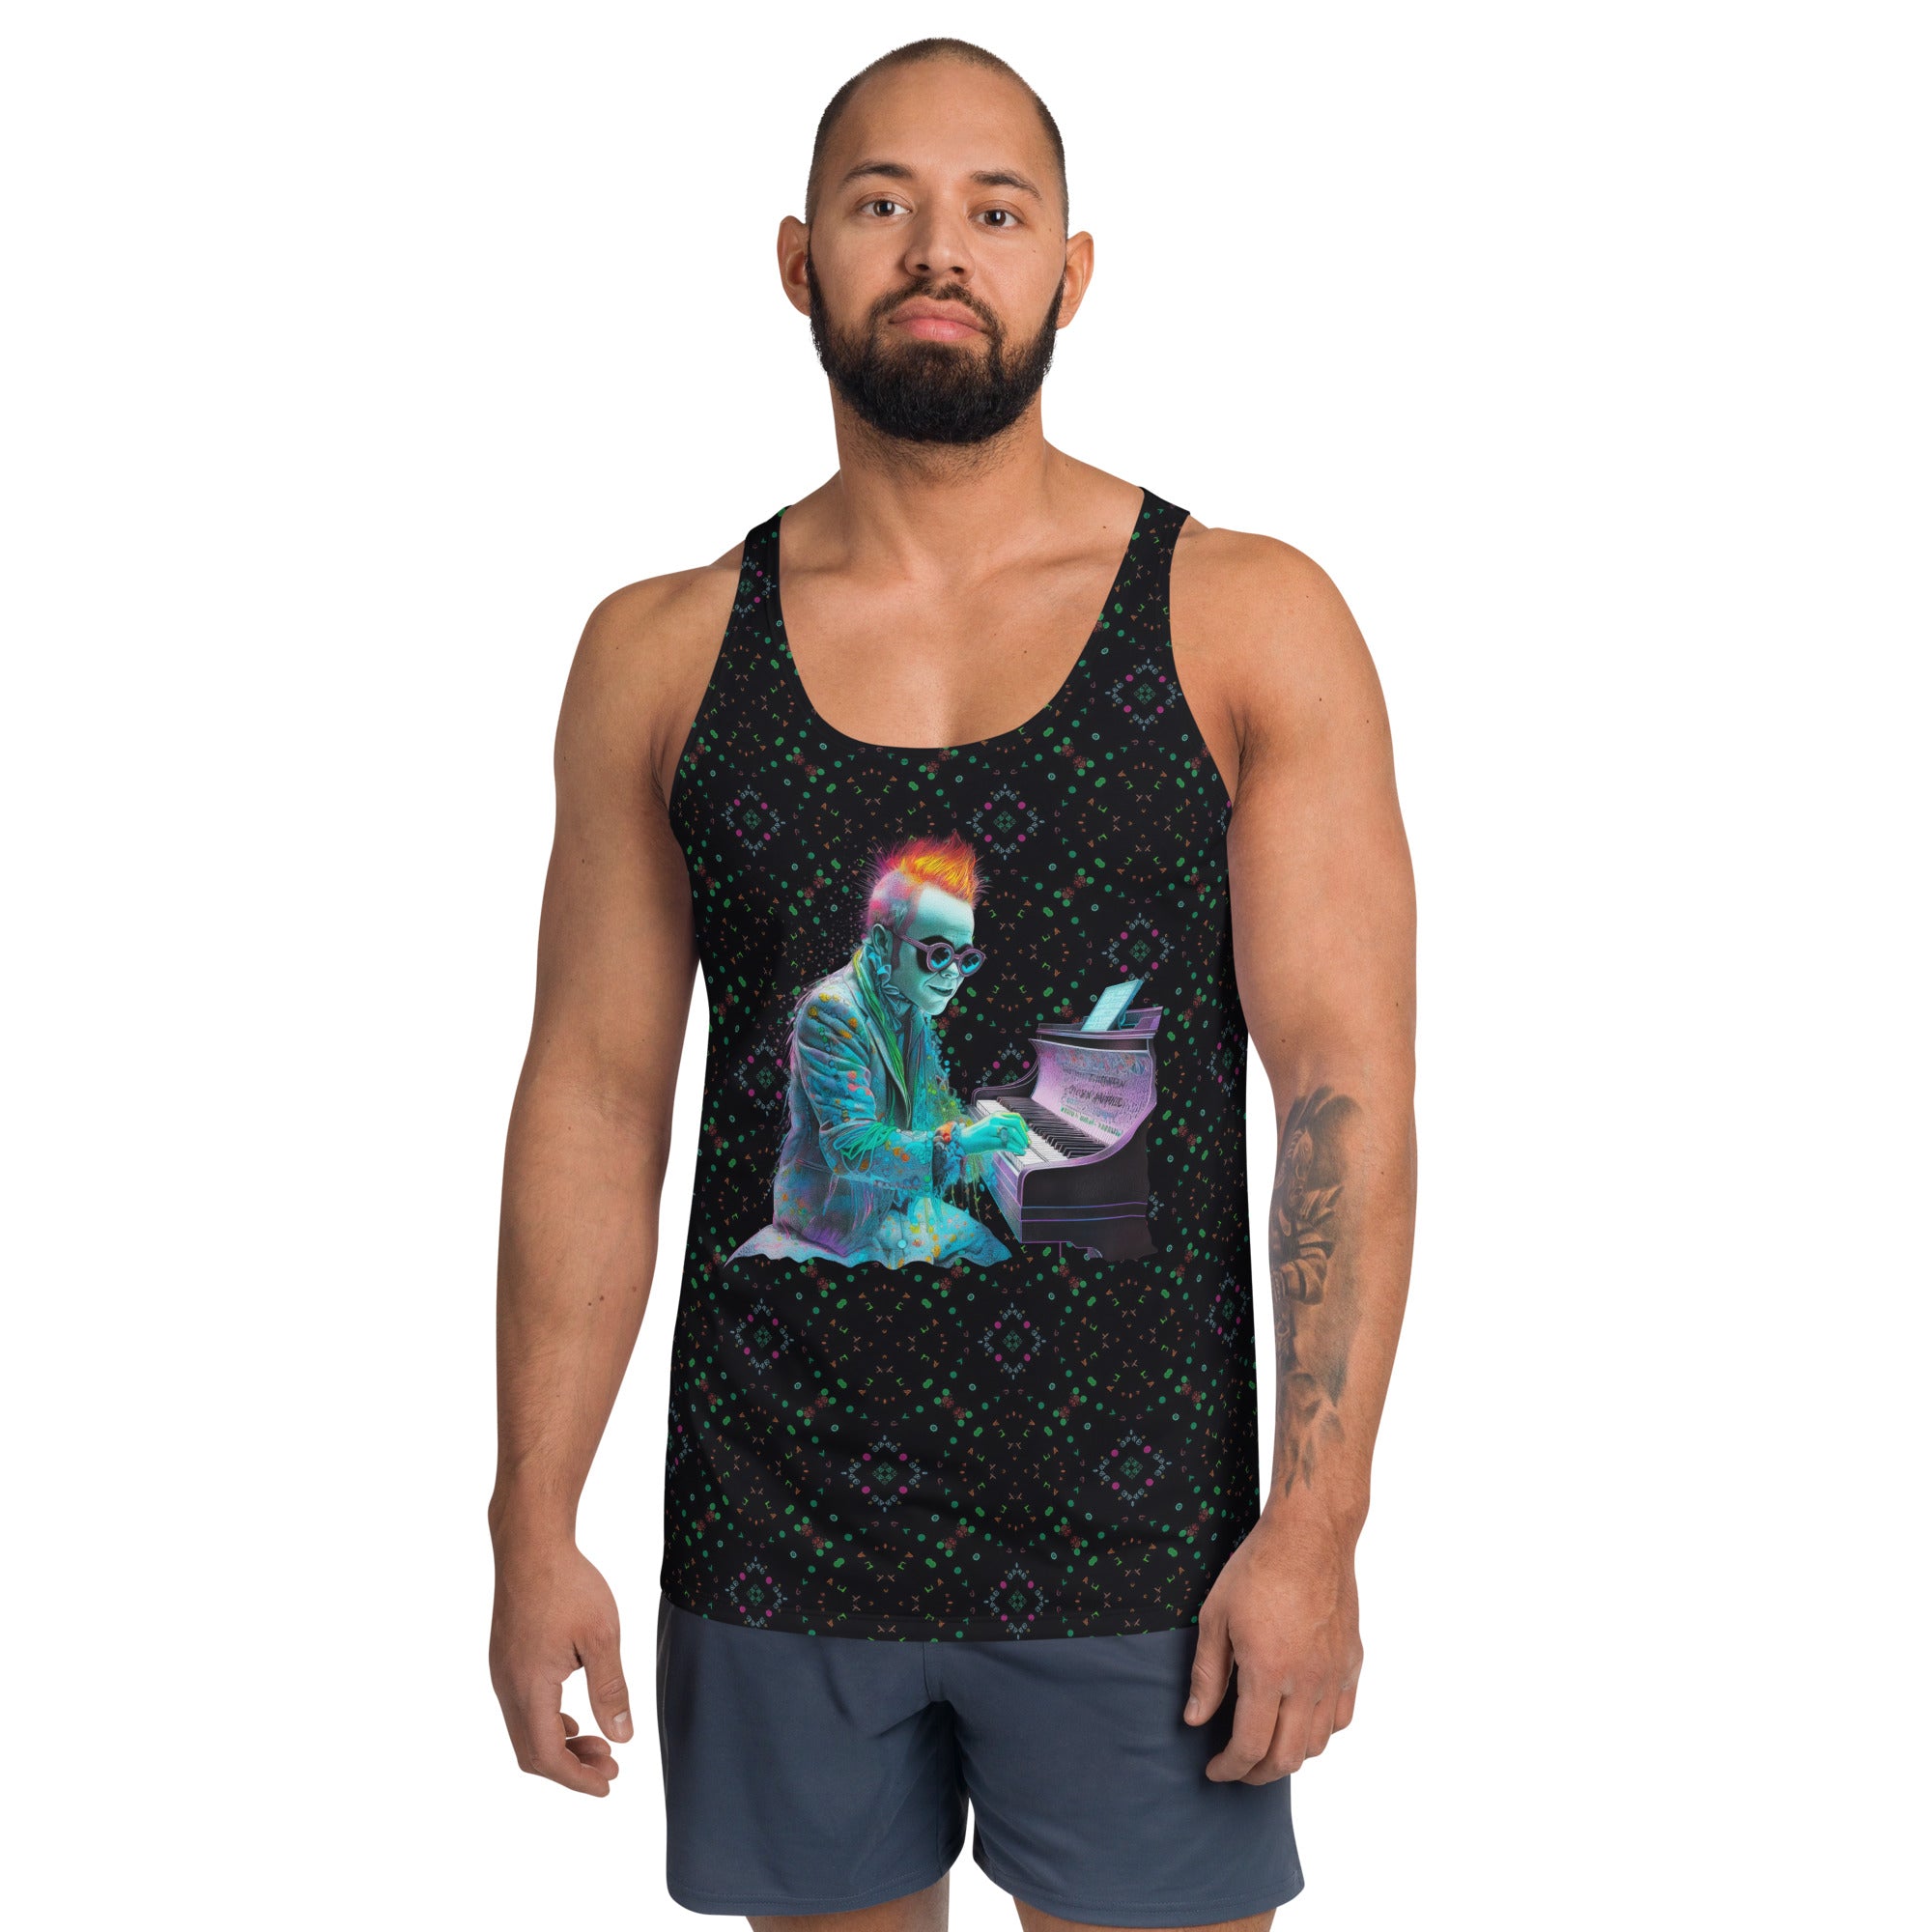 Psychedelic pop art design on men's tank top - colorful and vibrant